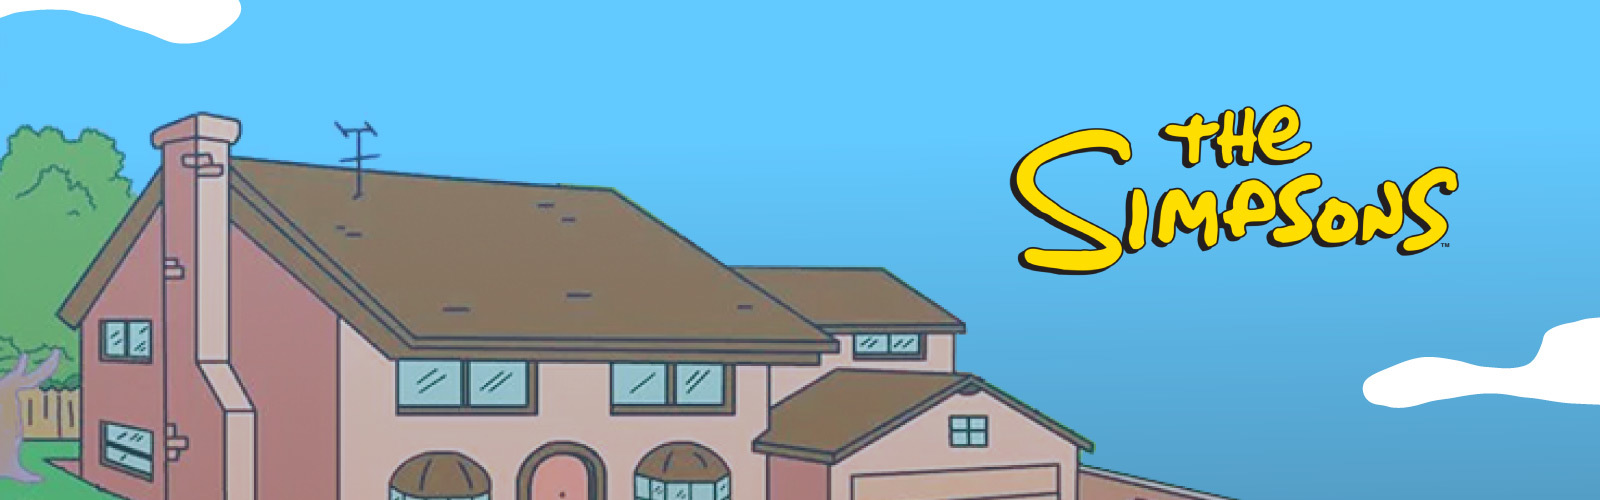 Simpsons home in Springfield